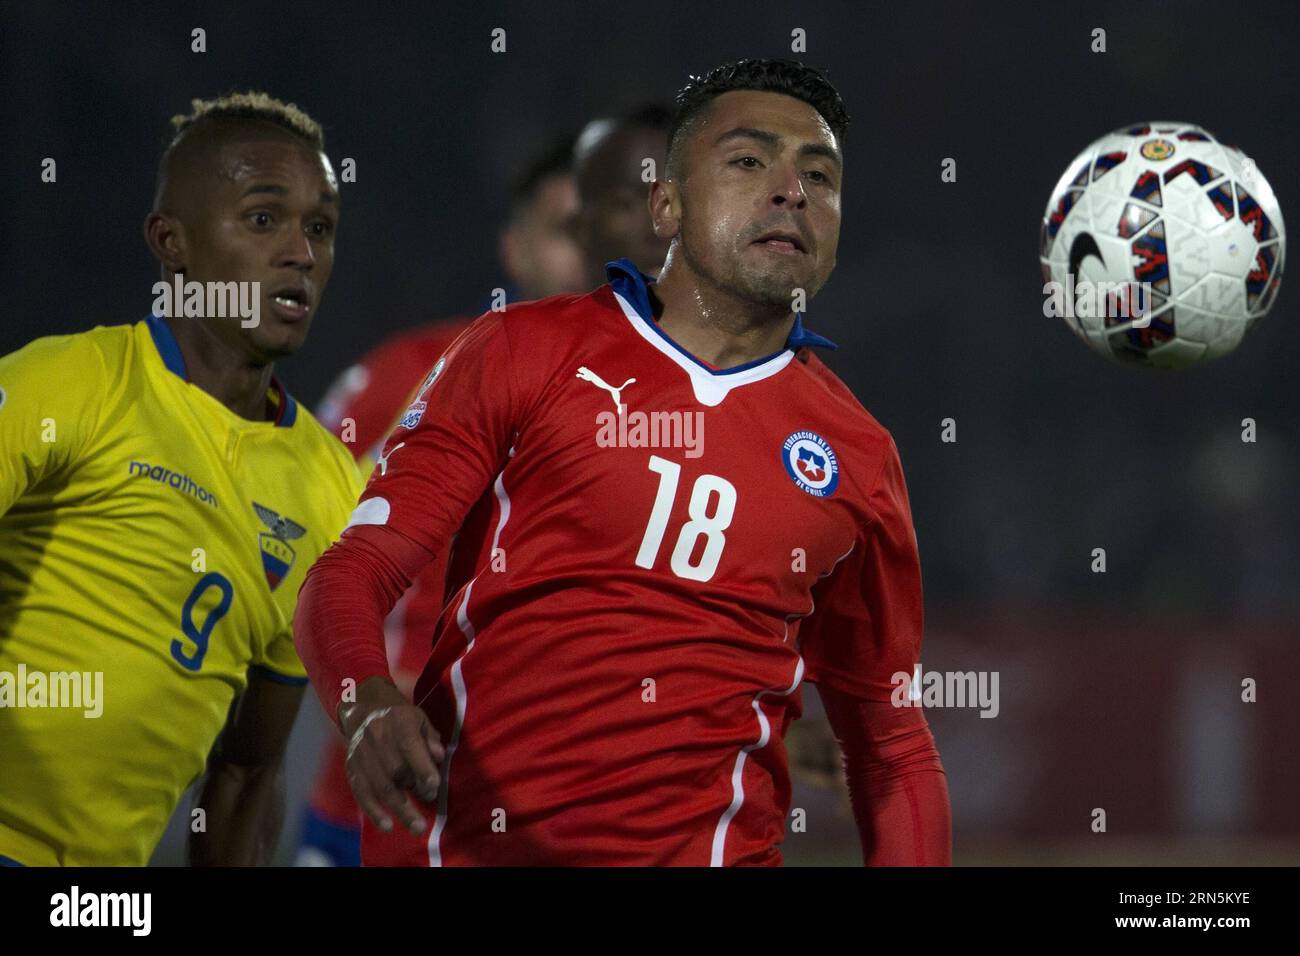 Image taken on June 11, 2015 shows Chilean player Gonzalo Jara (R) competing during a group match at the 2015 Chile Copa America in Santiago, Chile. The South American Football Confederation Disciplinary Unit decided on June 28, 2015 to impose a suspension of three official games on Gonzalo Jara because of his inappropriate touching Uruguayan striker Edinson Cavani. ) (jp) (SP)CHILE-SANTIAGO-COPA AMERICA-GONZALO JARA GuillermoxArias PUBLICATIONxNOTxINxCHN   Image Taken ON June 11 2015 Shows Chilean Player Gonzalo Jara r competing during a Group Match AT The 2015 Chile Copa America in Santiago Stock Photo